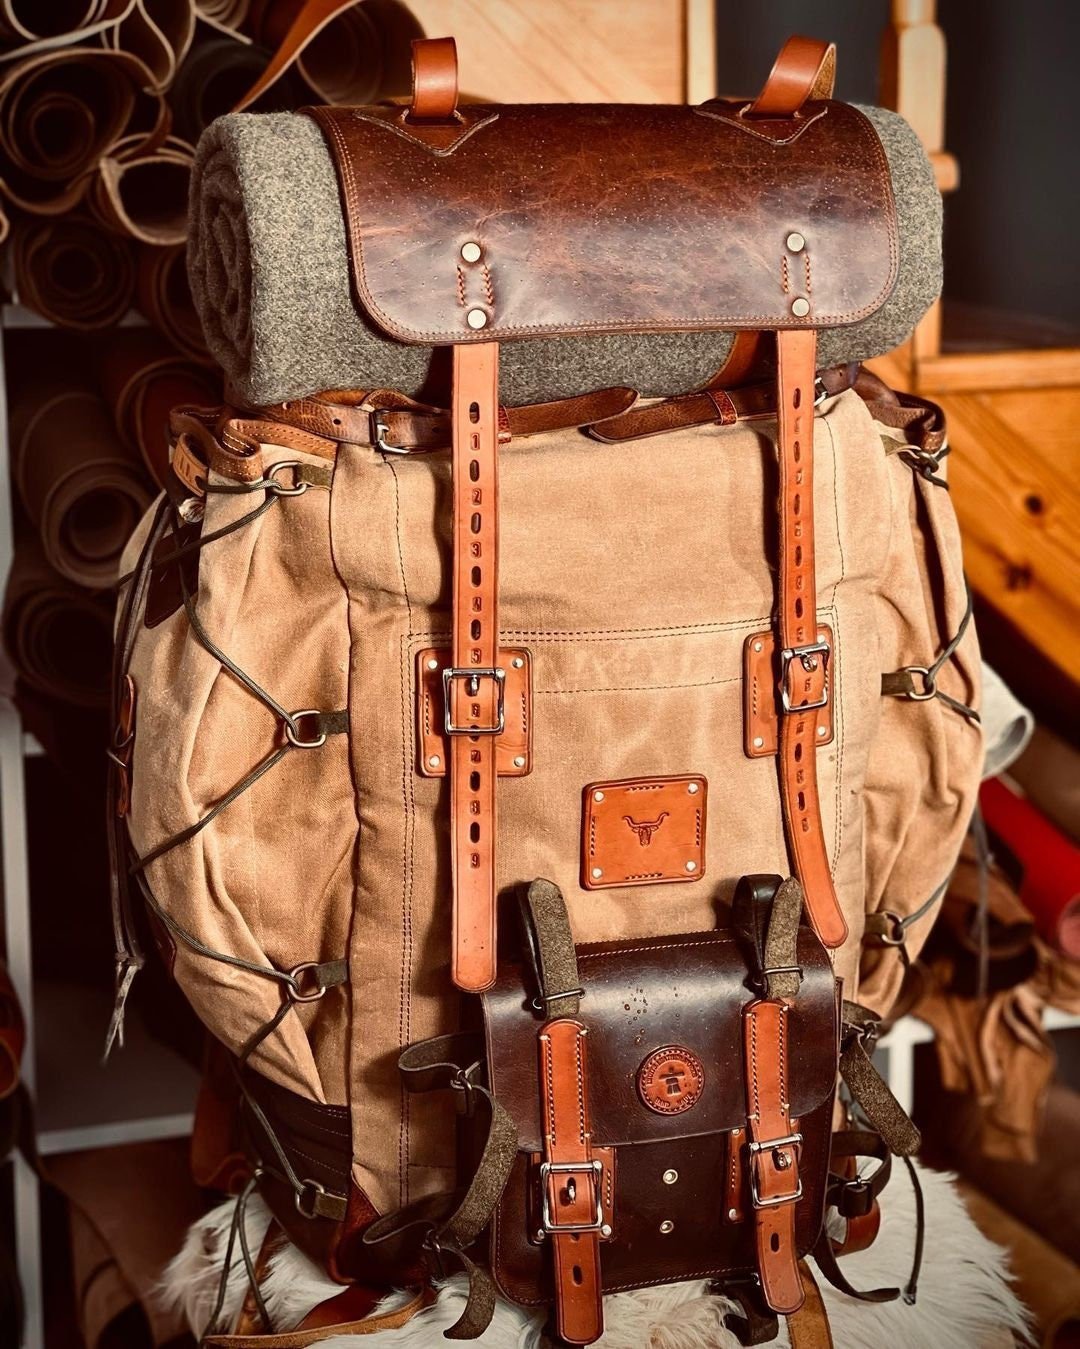 Custom Order Daniel | Bushcraft Design Finalist | Handmade Leather and Canvas Backpack for Travel, Camping,Military | 45 Liter | Personalization bushcraft - camping - hiking backpack 99percenthandmade   